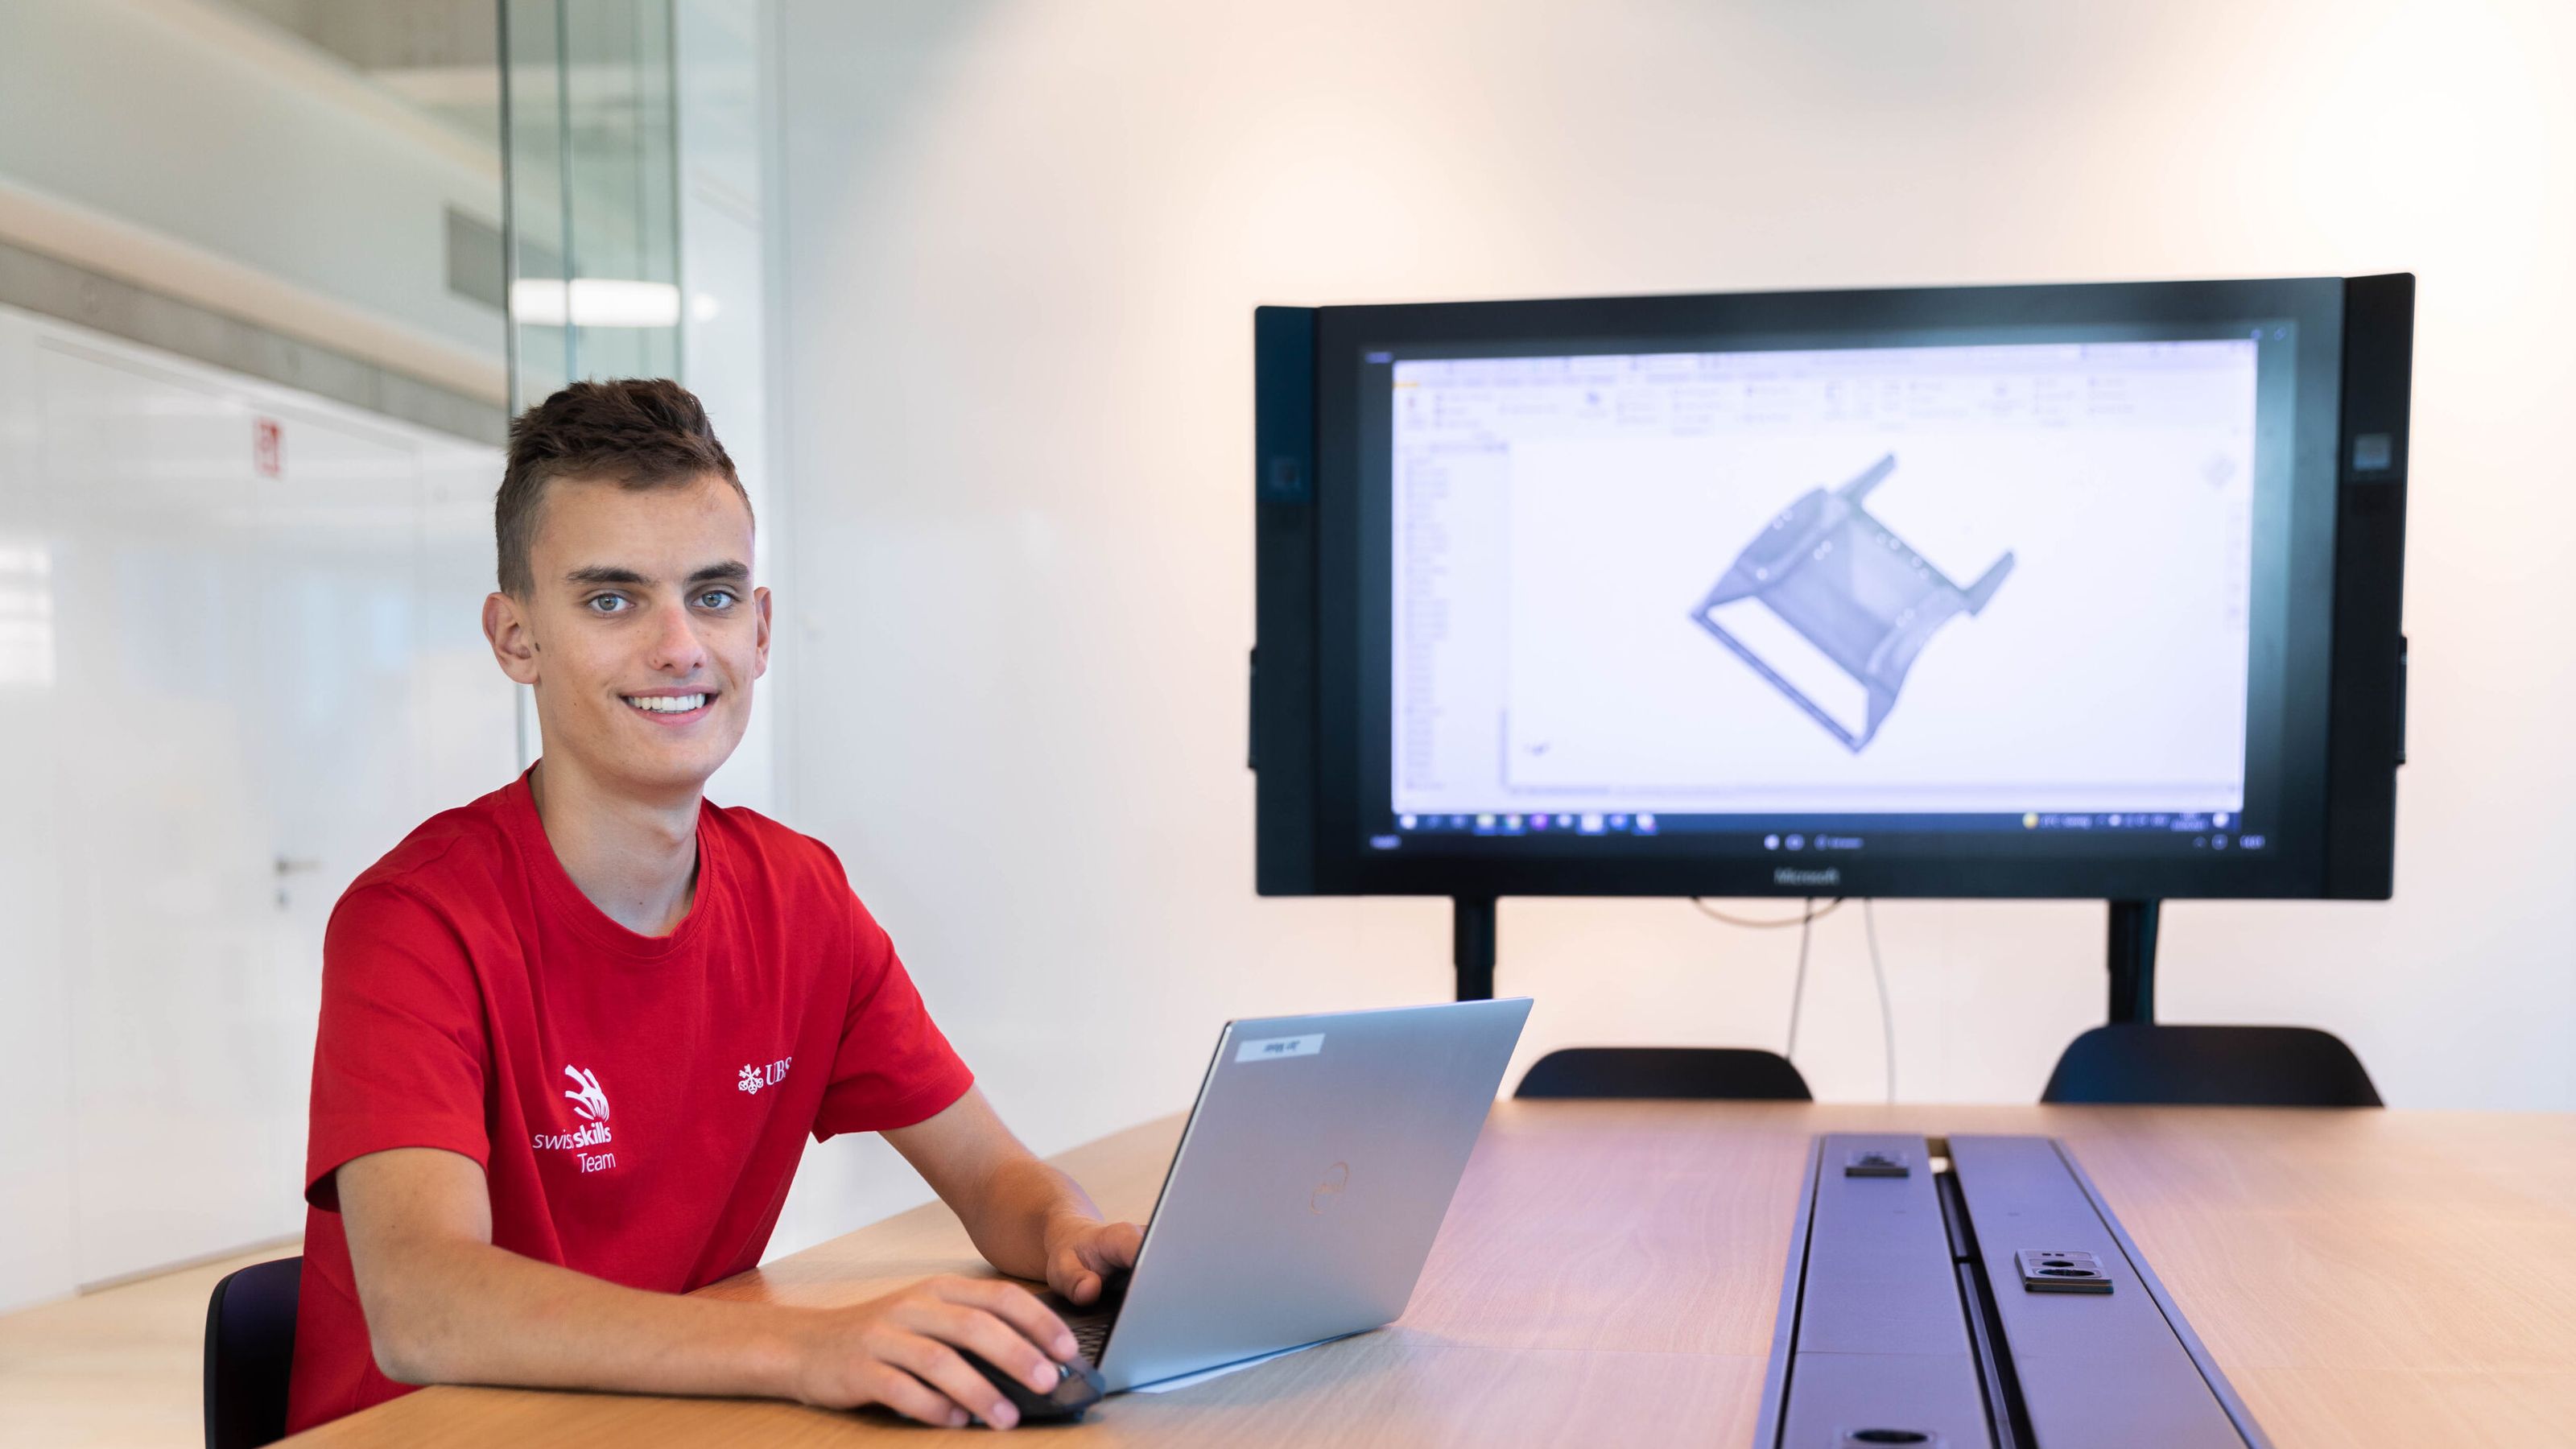 Bühler apprentice Jan Meier won the SwissSkills competition in 2020 and came fourth this year in the EuroSkills in Graz.